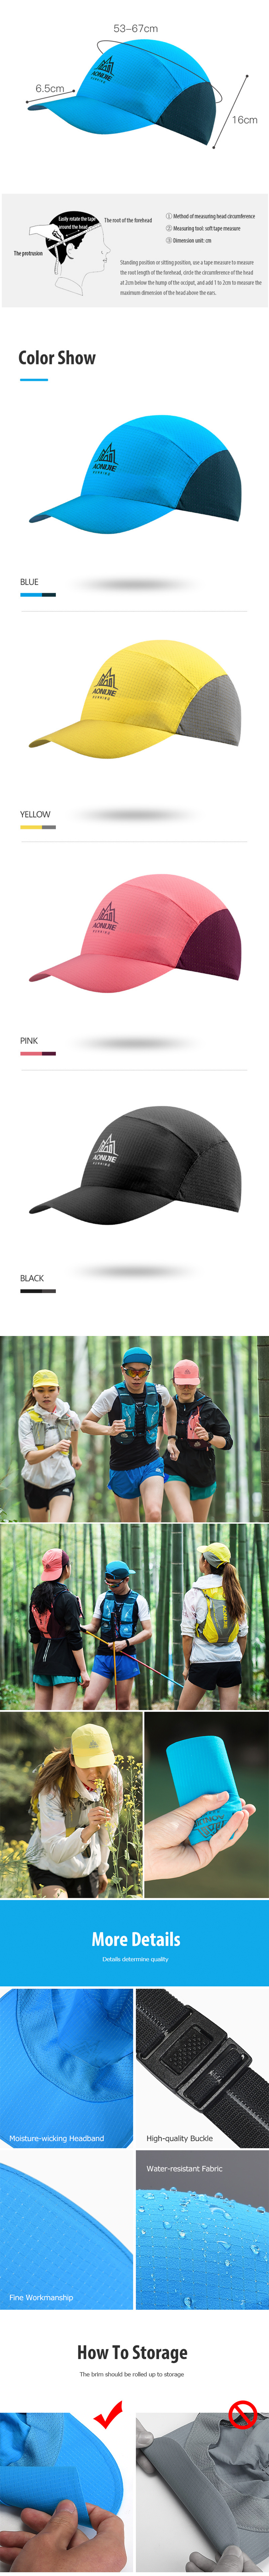 AONIJIE-Men-Women-Folable-Fast-Dry-Sun-Protection-Summer-Sports-Sun-Visor-Cap-Hat-For-Outdoor-Golf-F-1680036-2